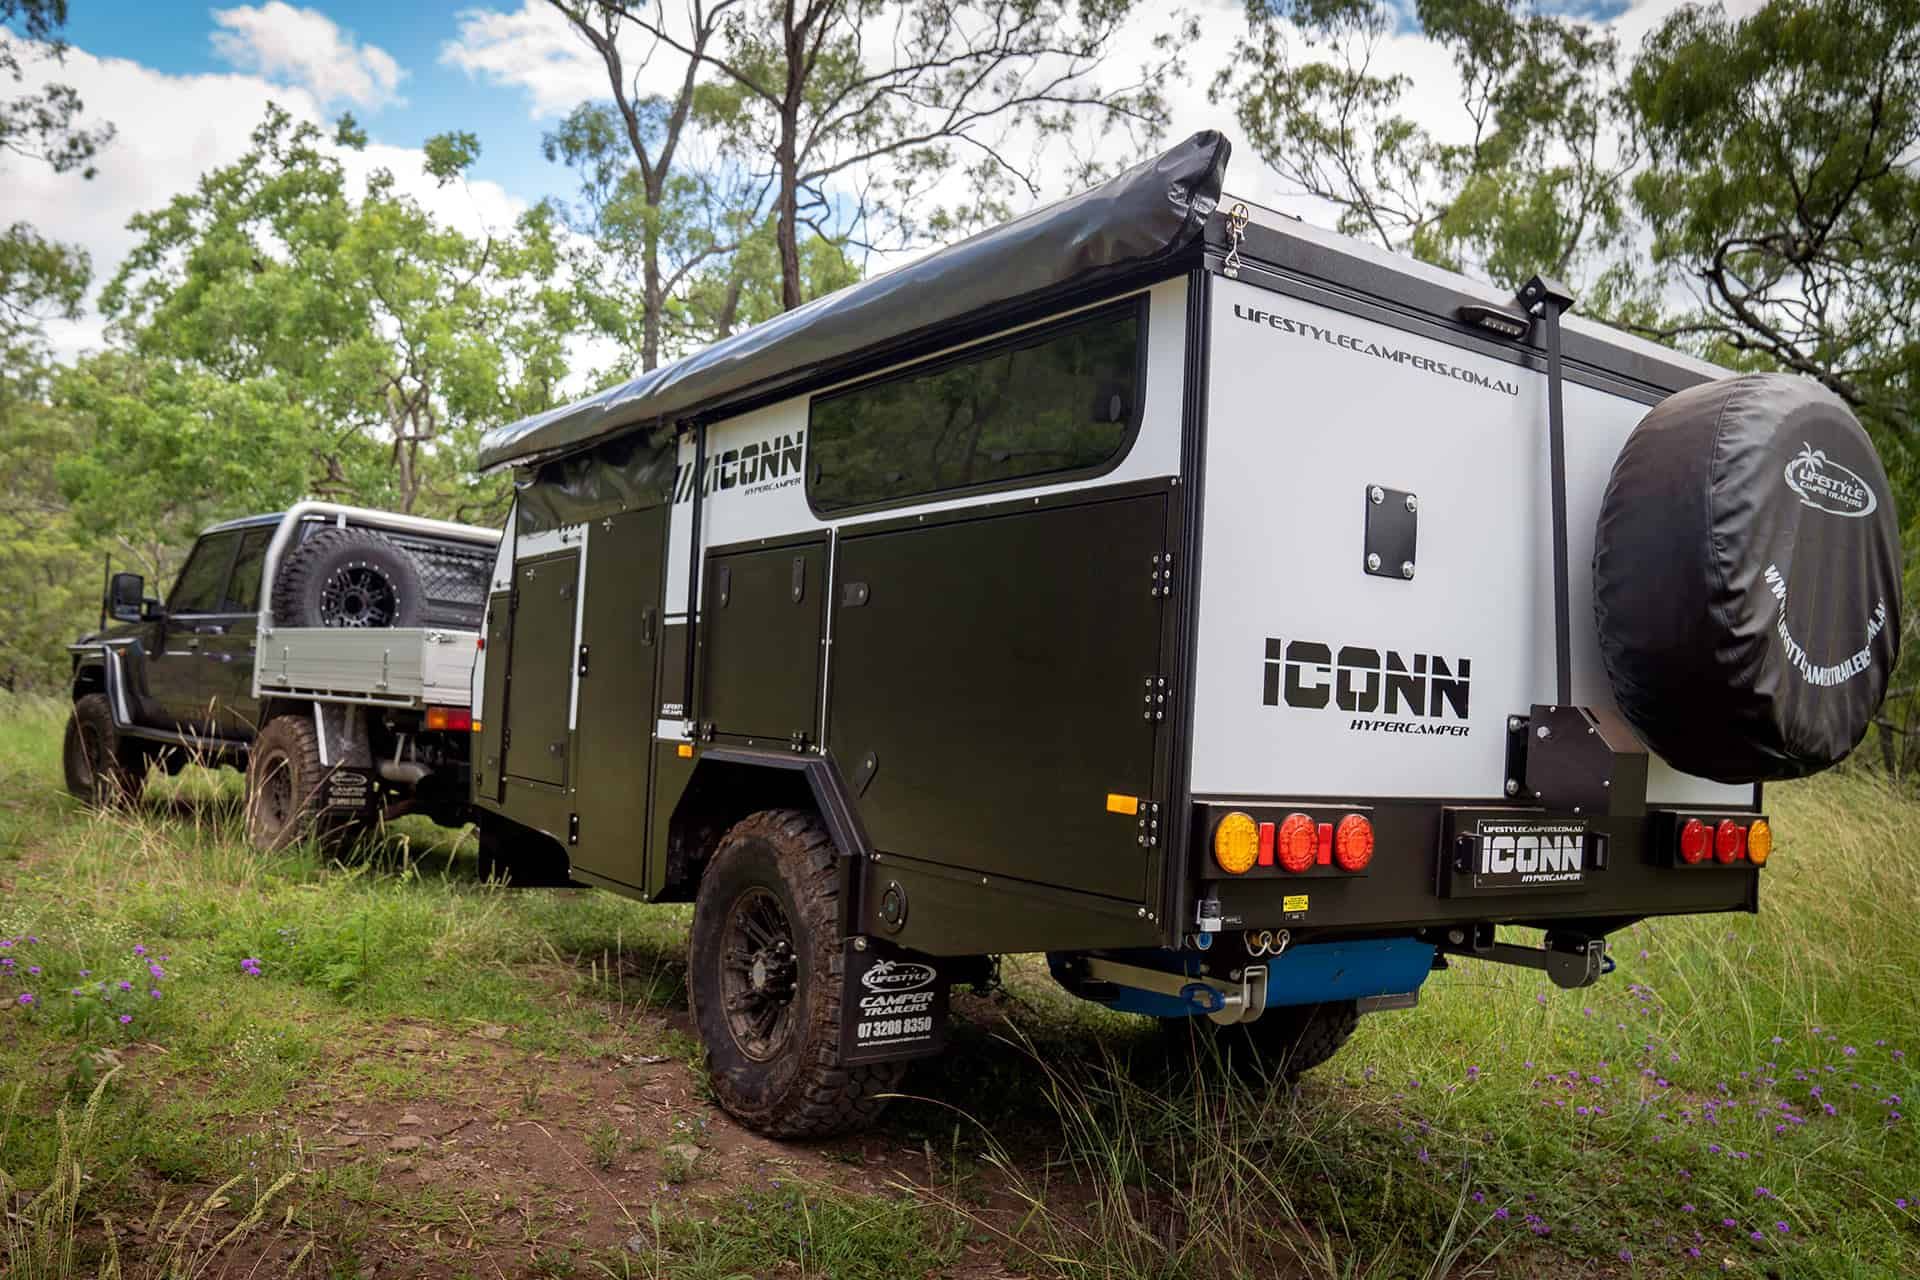 Iconn Off Road Hybrid Hypercamper Lifestyle Campers